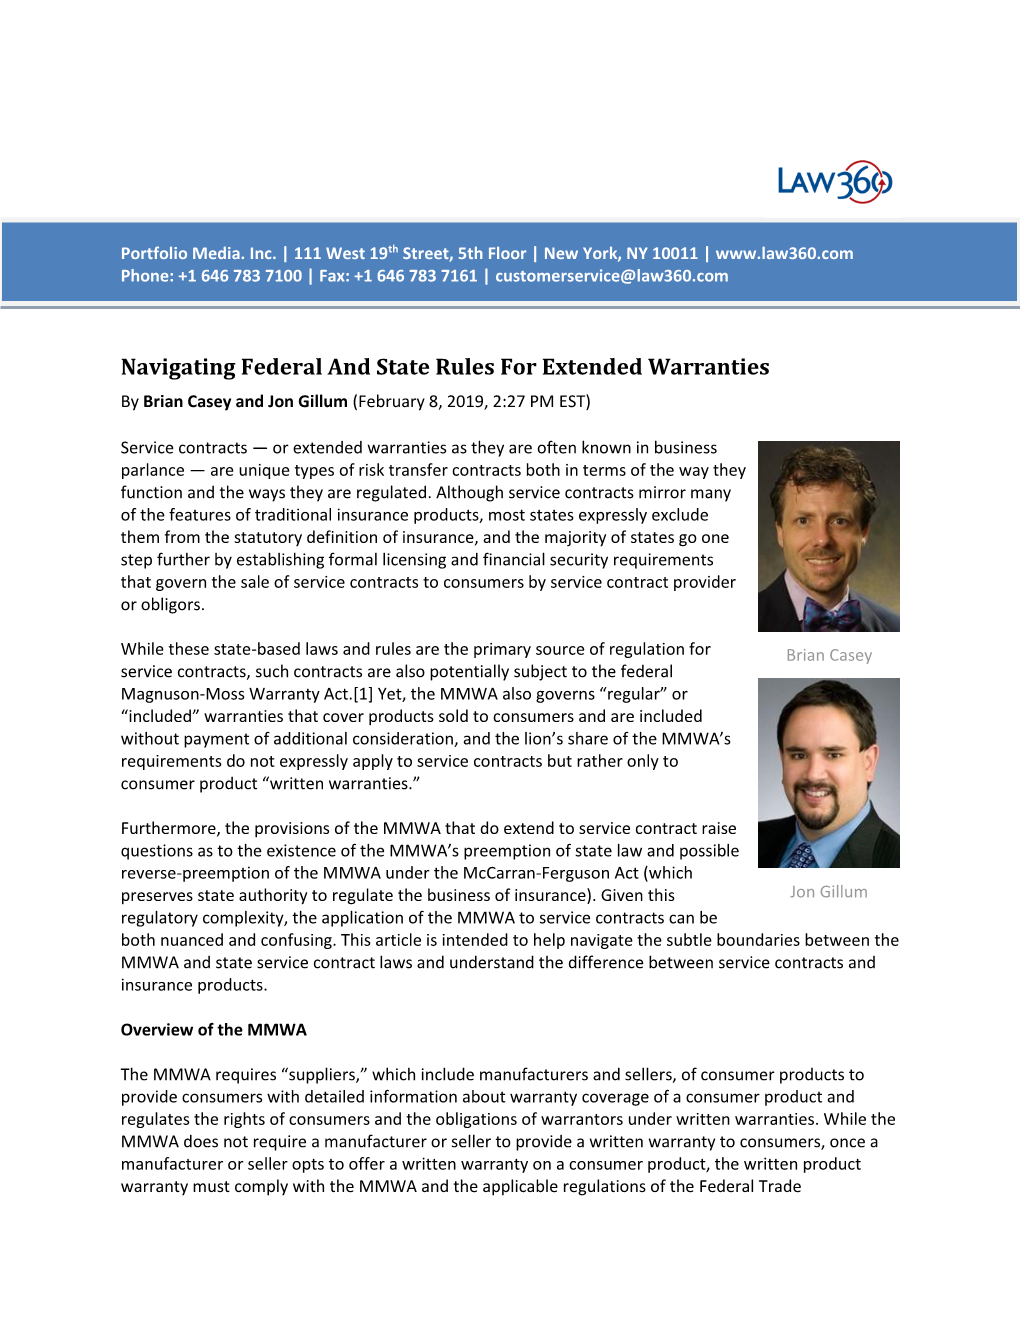 Navigating Federal and State Rules for Extended Warranties by Brian Casey and Jon Gillum (February 8, 2019, 2:27 PM EST)